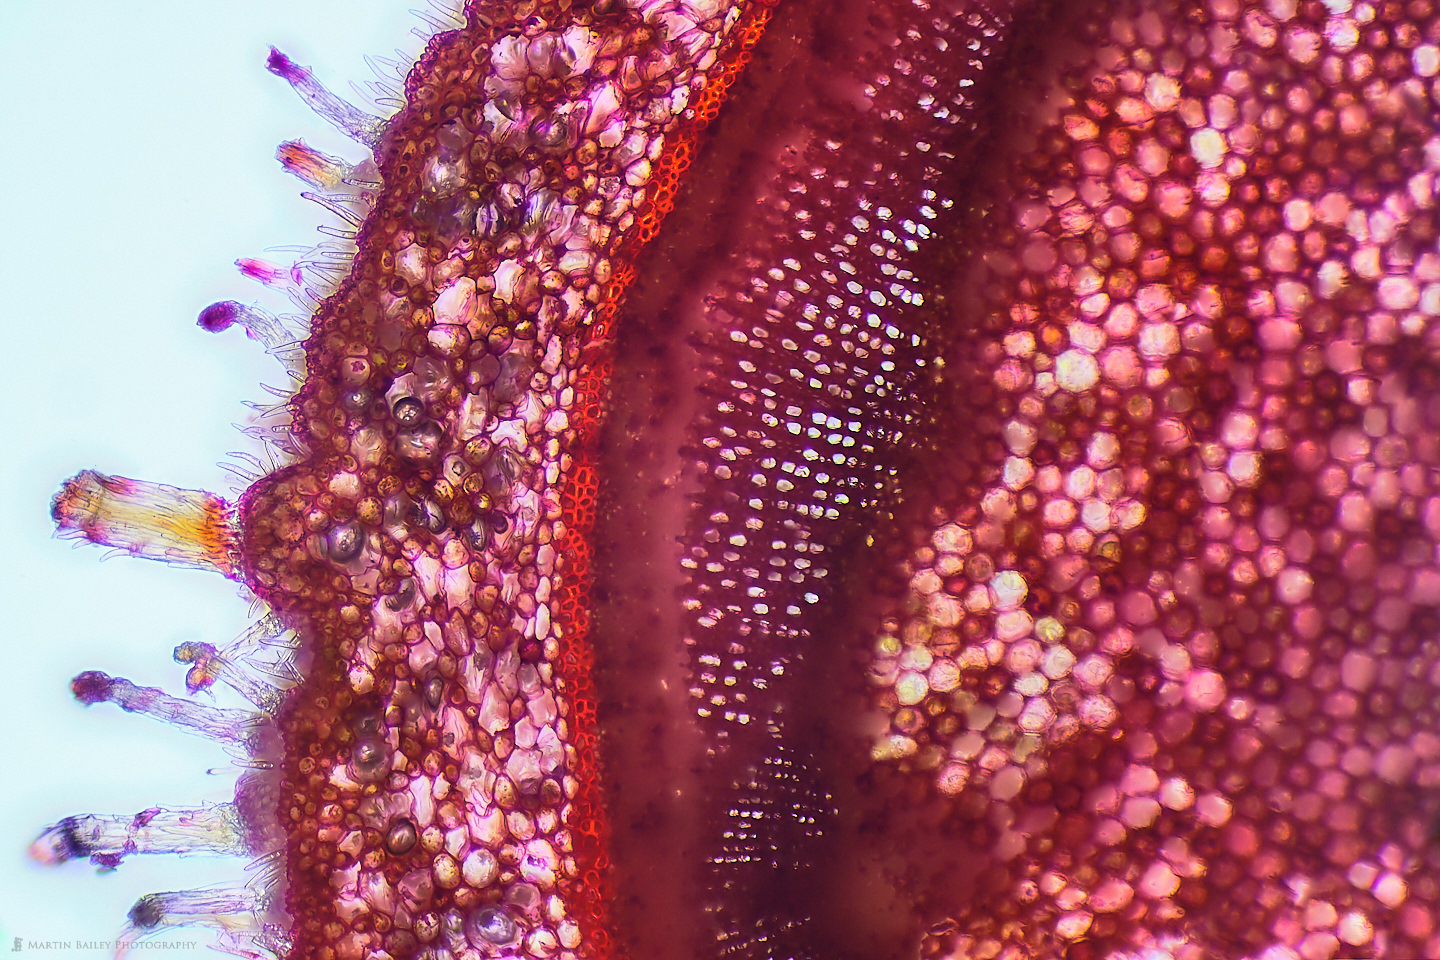 Using a Microtome and Staining for Microphotography (Podcasts 767)